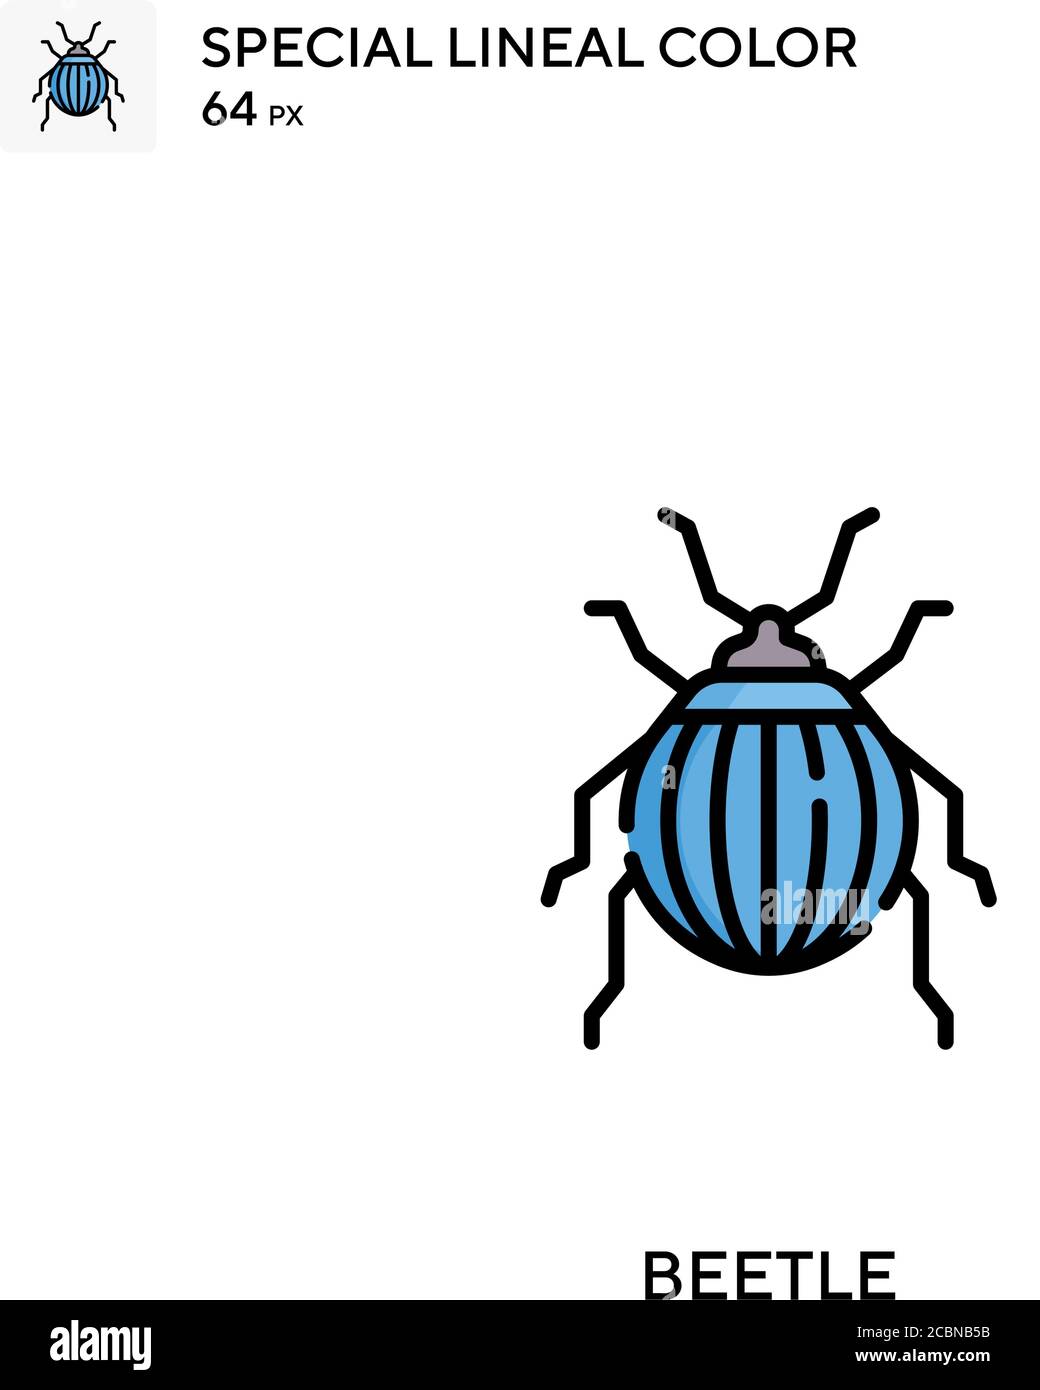 Beetle Special lineal color vector icon. Beetle icons for your business project Stock Vector